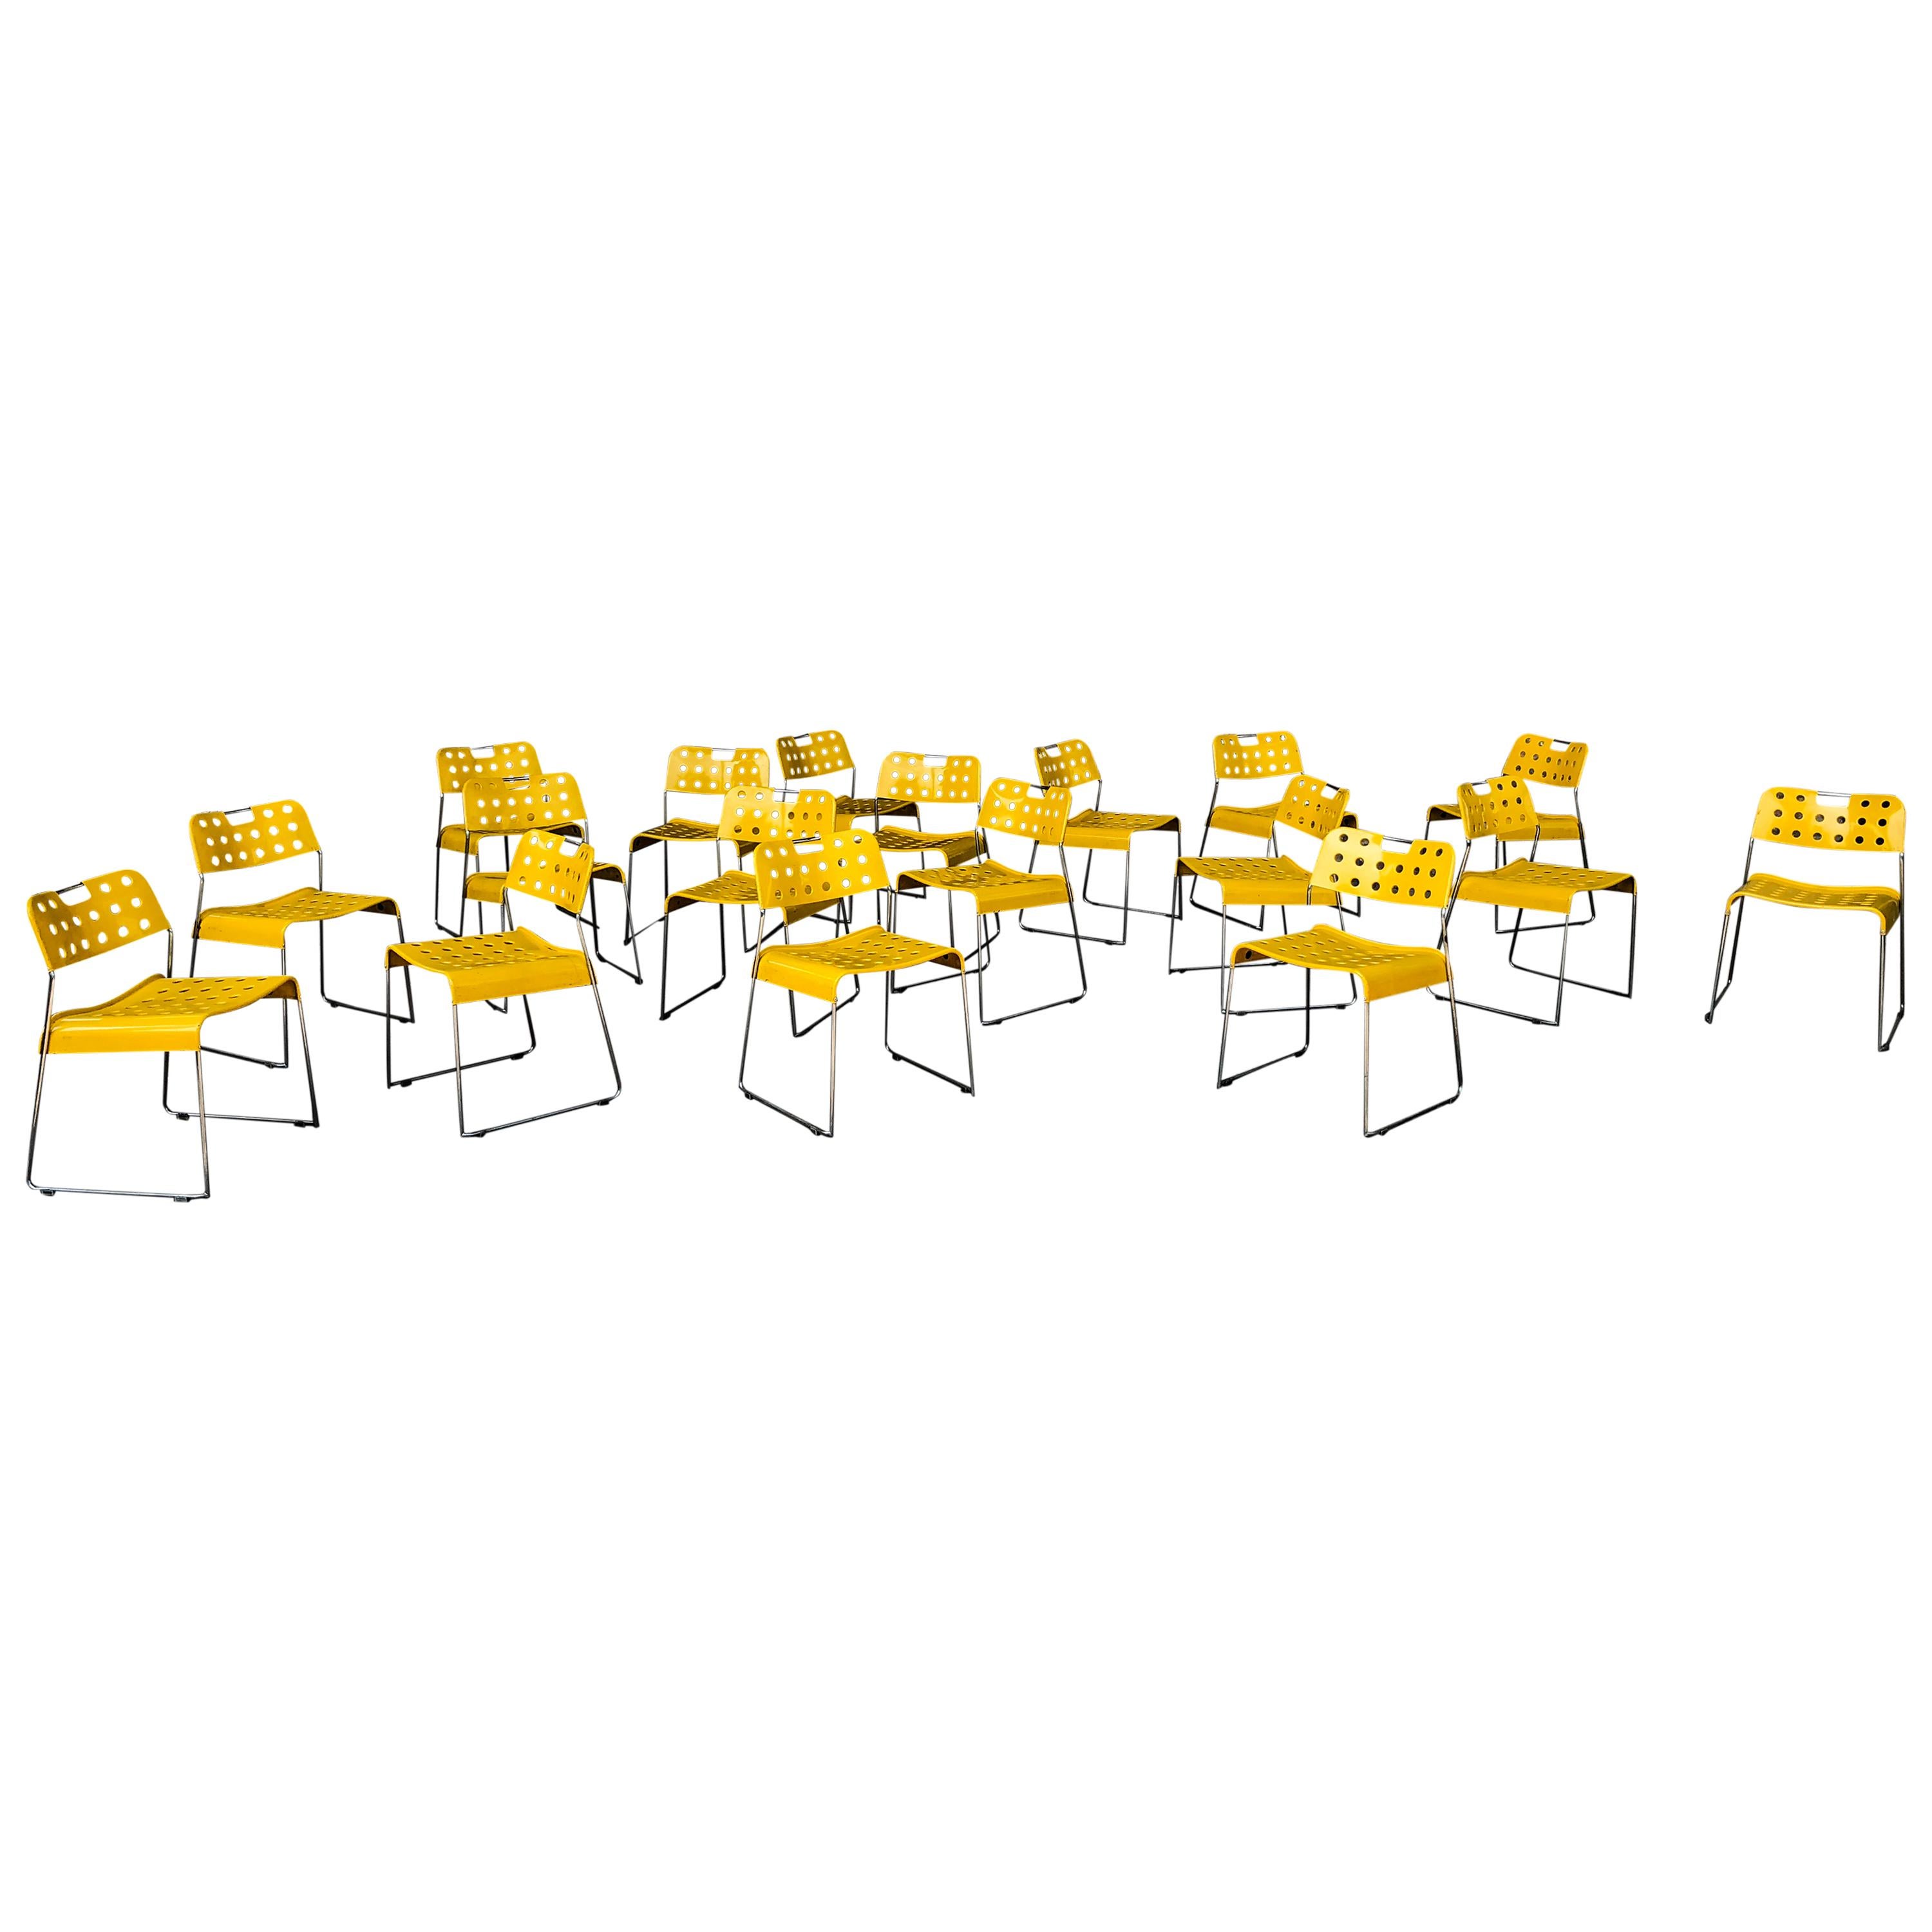 Rodney Kinsman Space Age Yellow Omstak Chair for Bieffeplast, 1971, Set of 10 For Sale 2